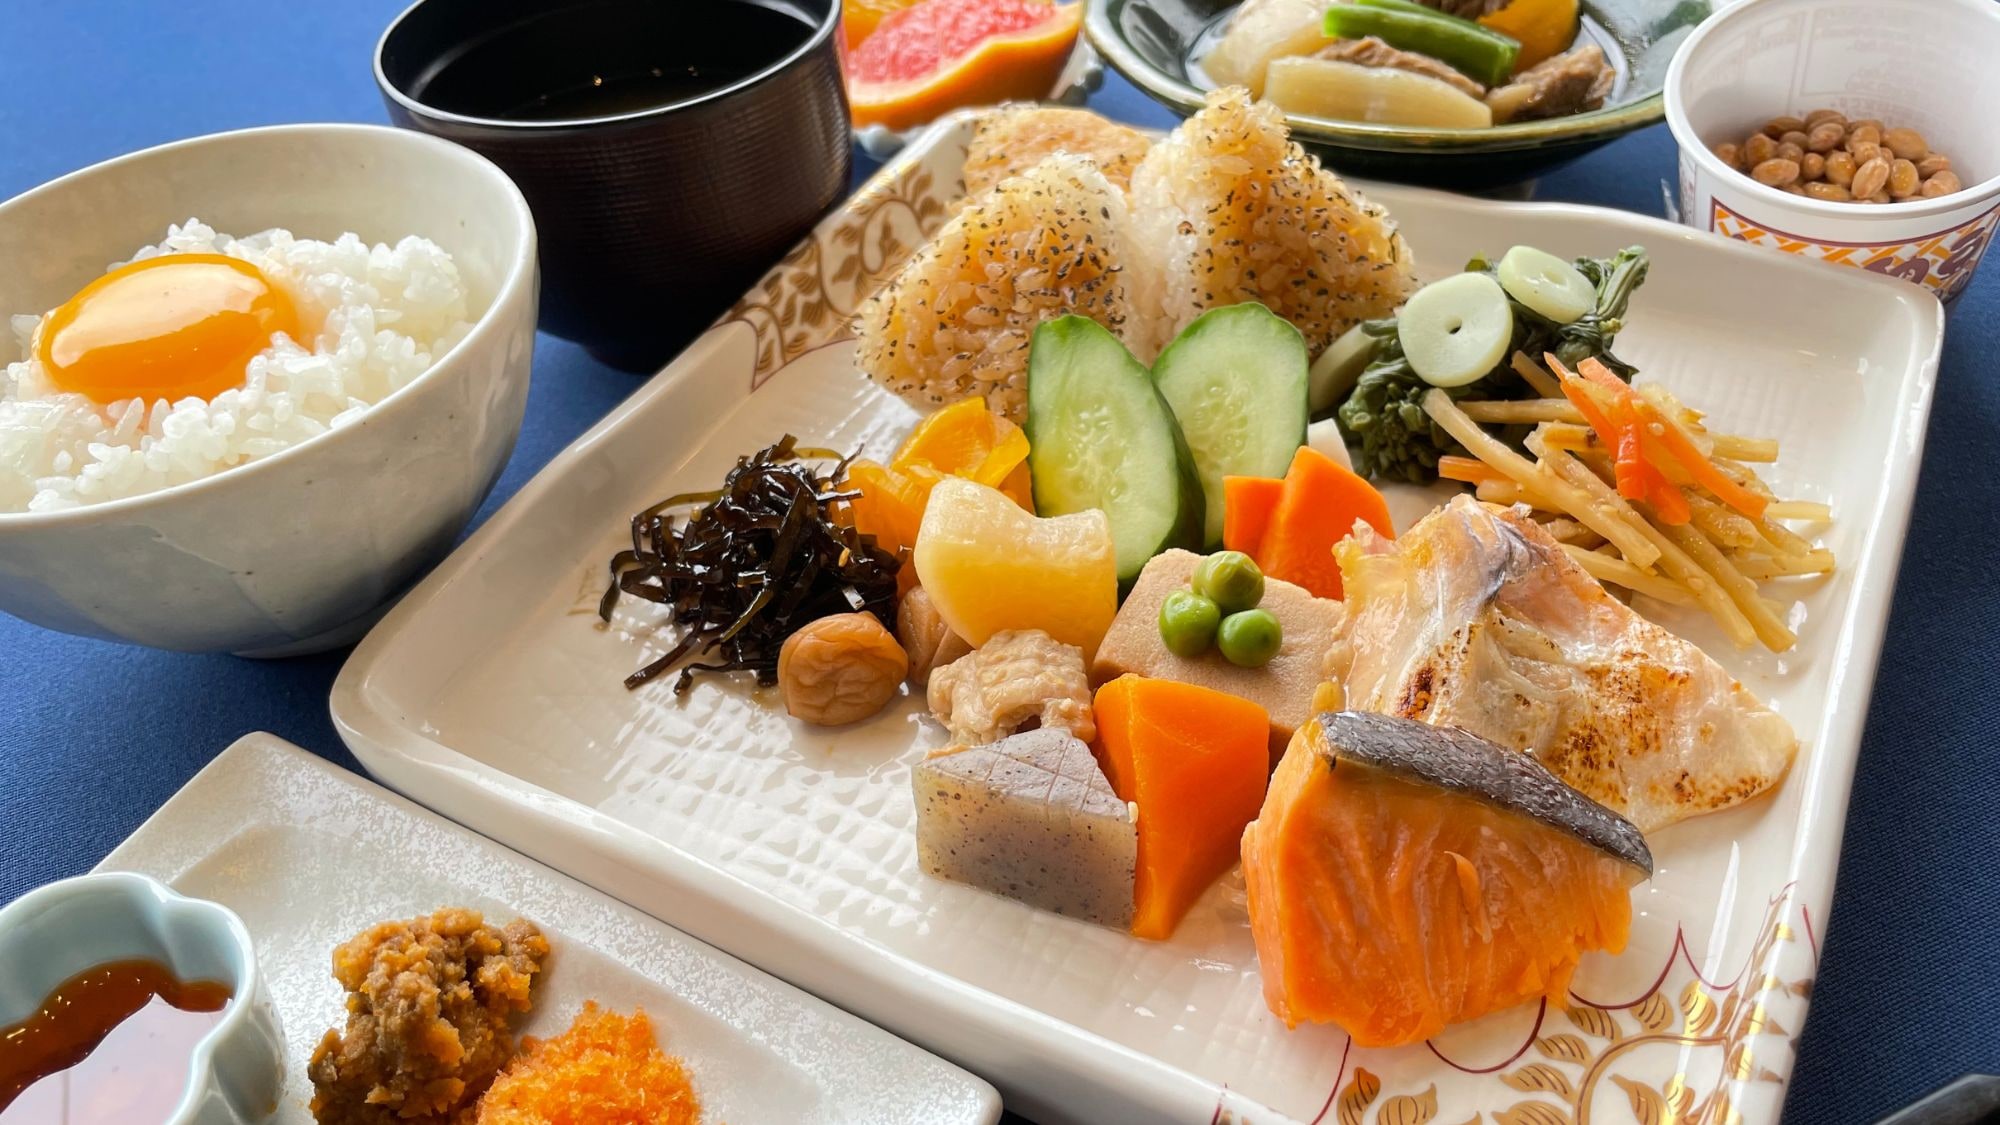 Japanese food that soaks into your body will make your heart feel relaxed